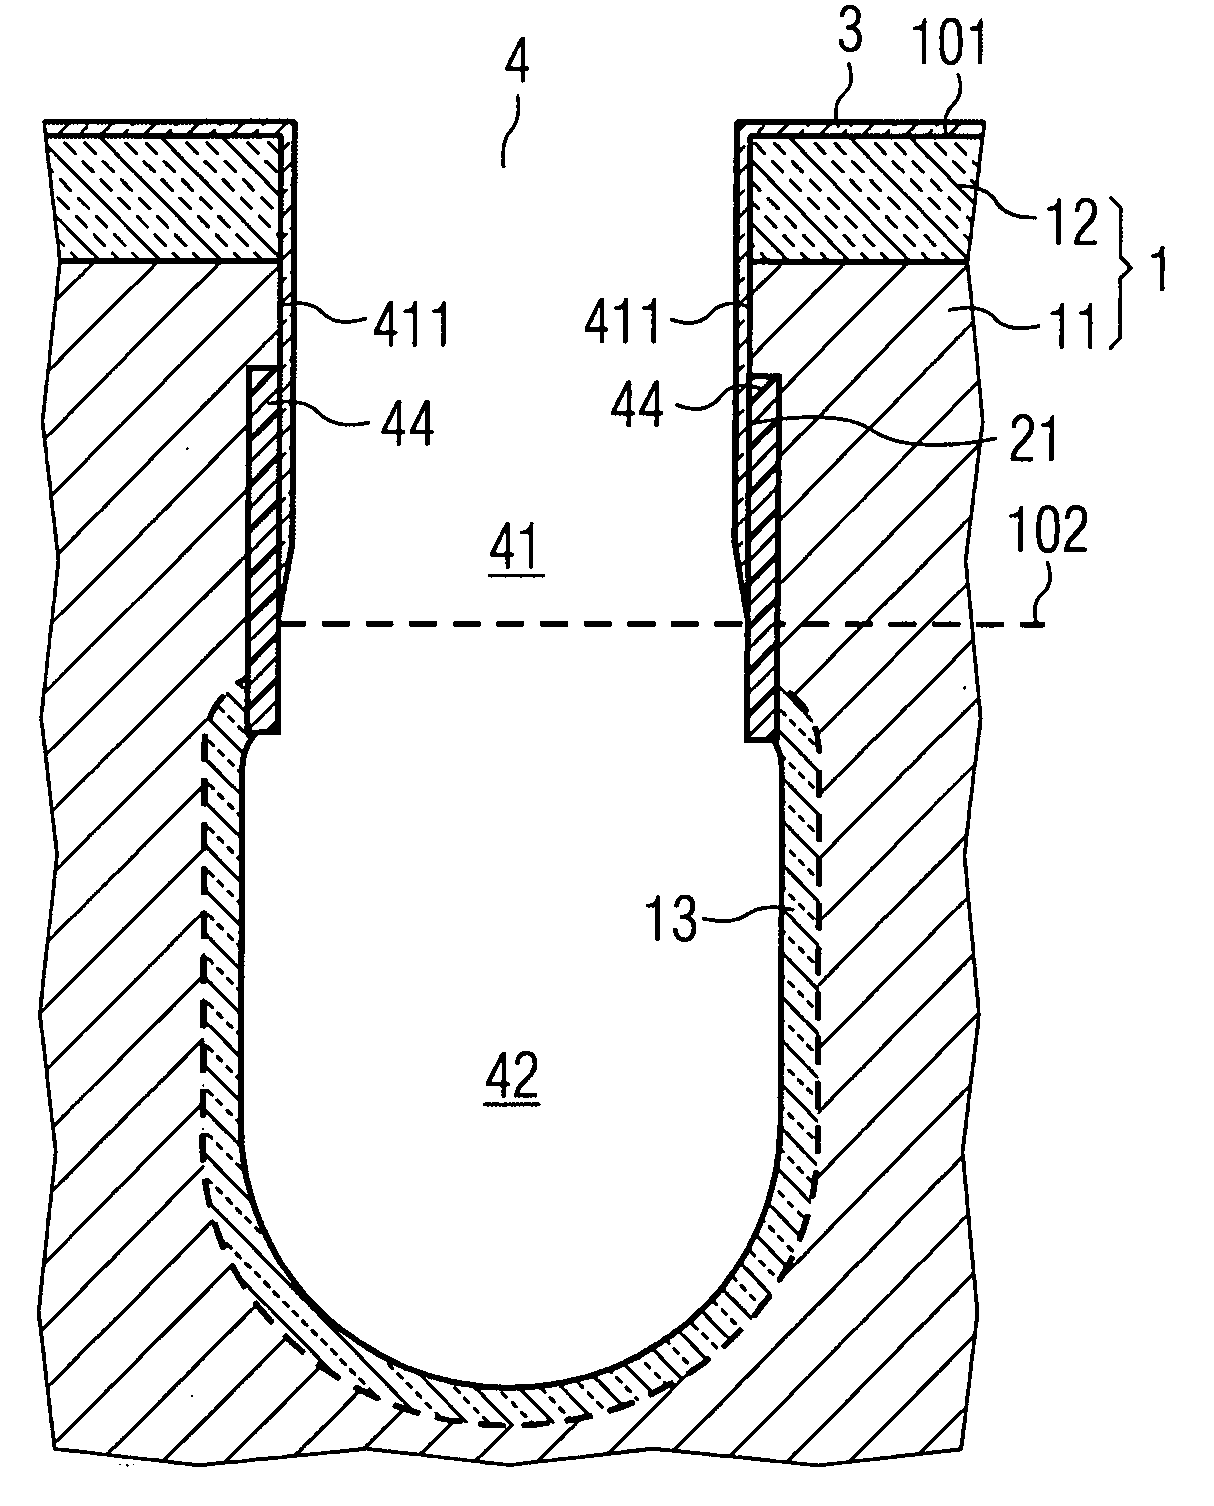 Process for vertically patterning substrates in semiconductor process technology by means of inconformal deposition